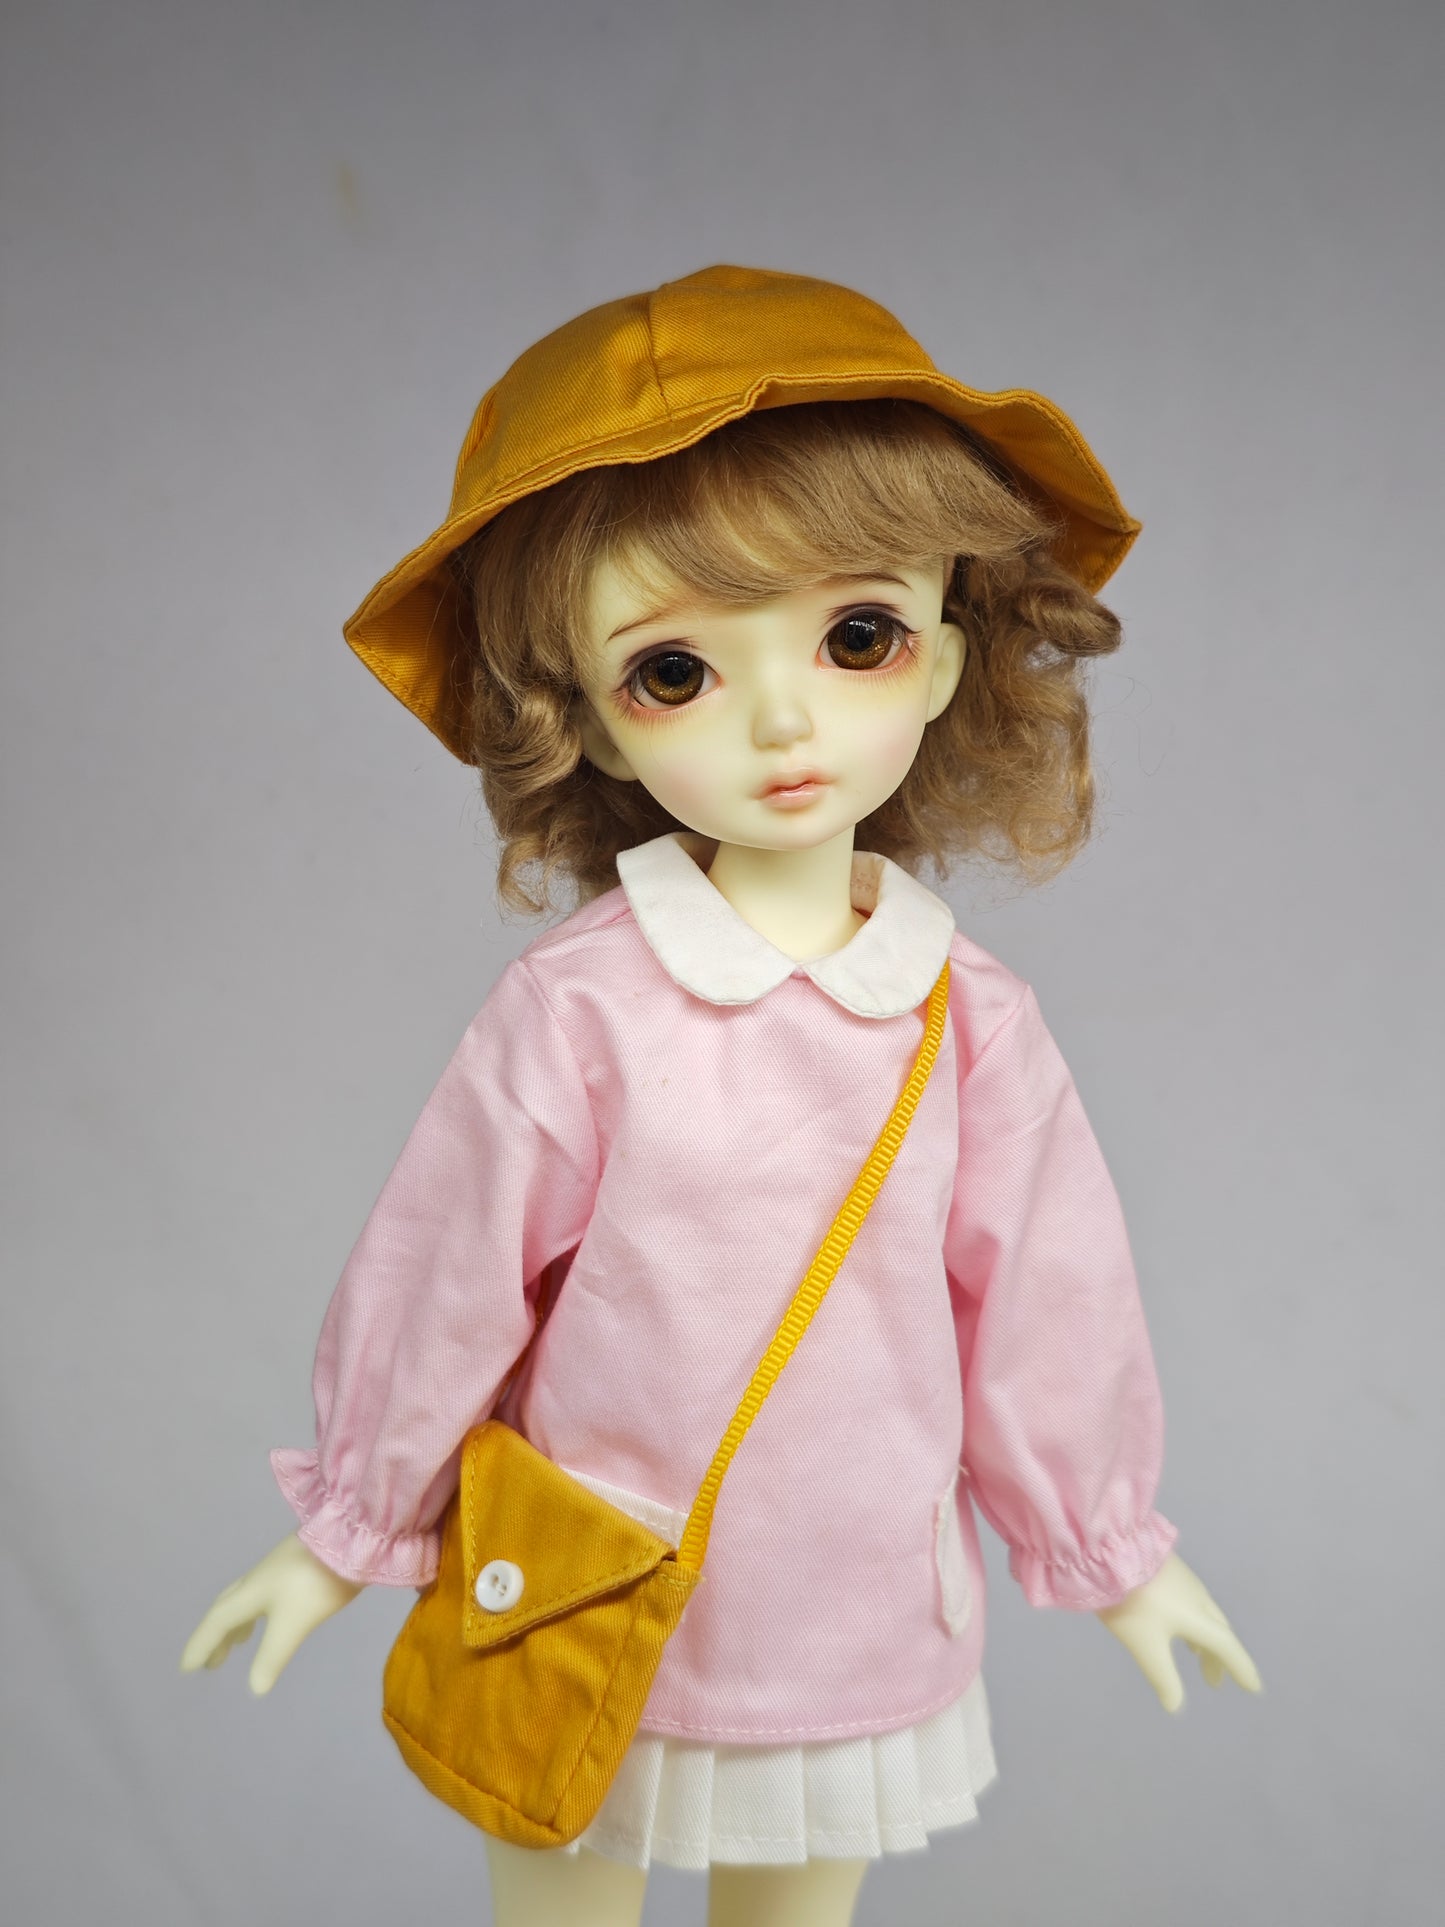 1/6 bjd girl doll Anna in white skin with shown items